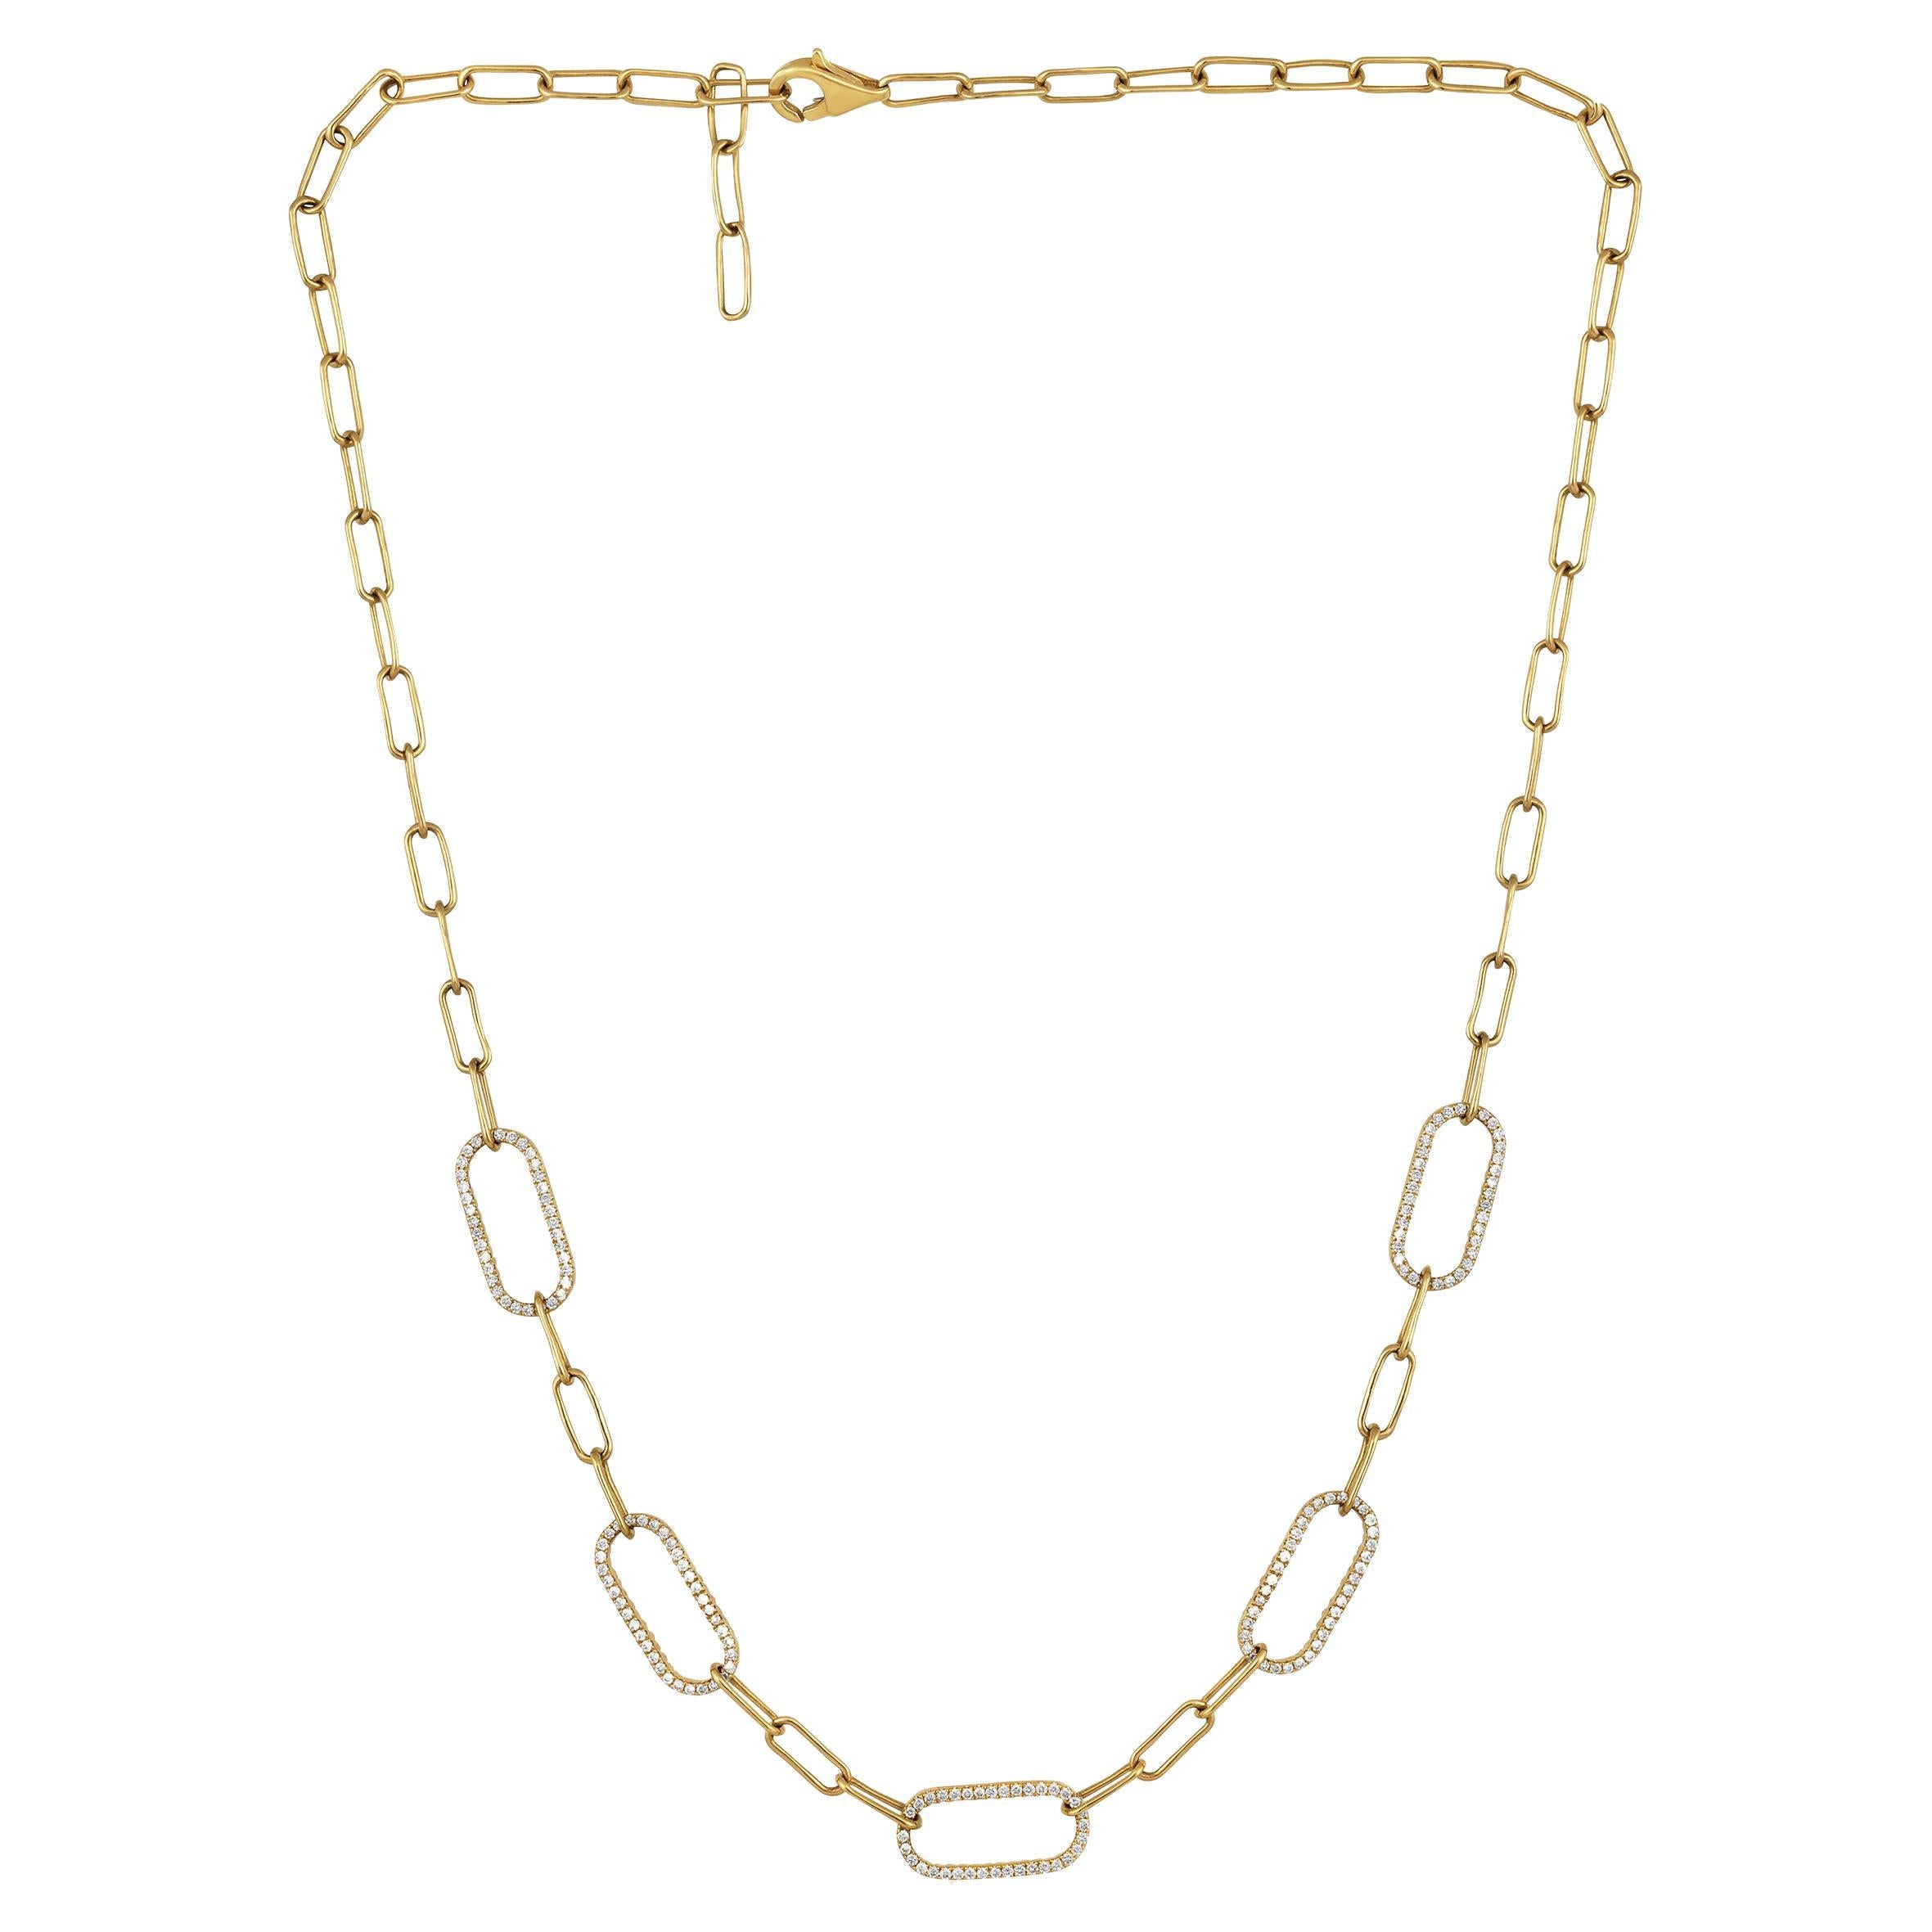 GLEAMIRE 14K Gold 1ct Natural Diamond F-SI Paperclip Link Chain Rope Necklace